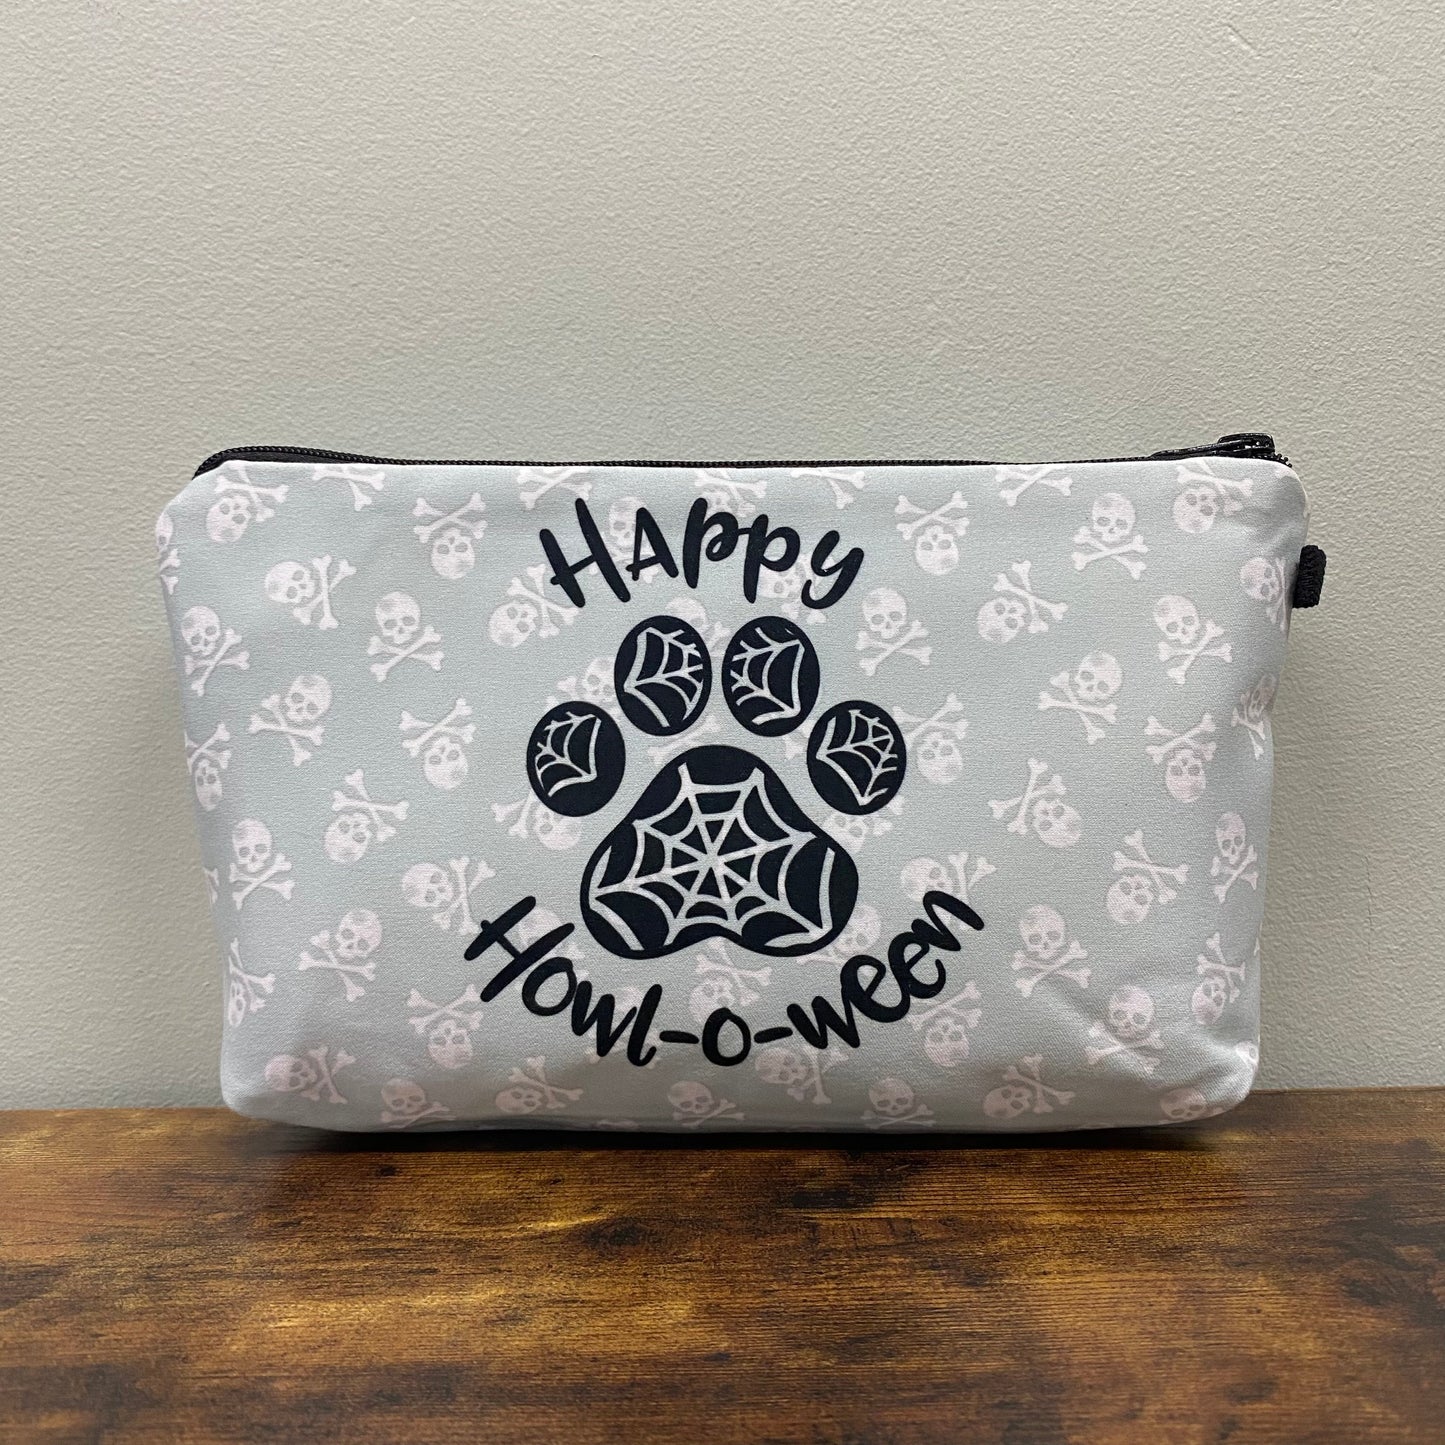 Pouch - Halloween - Happy Howl-O-Ween - LOCAL PICK UP OPTION